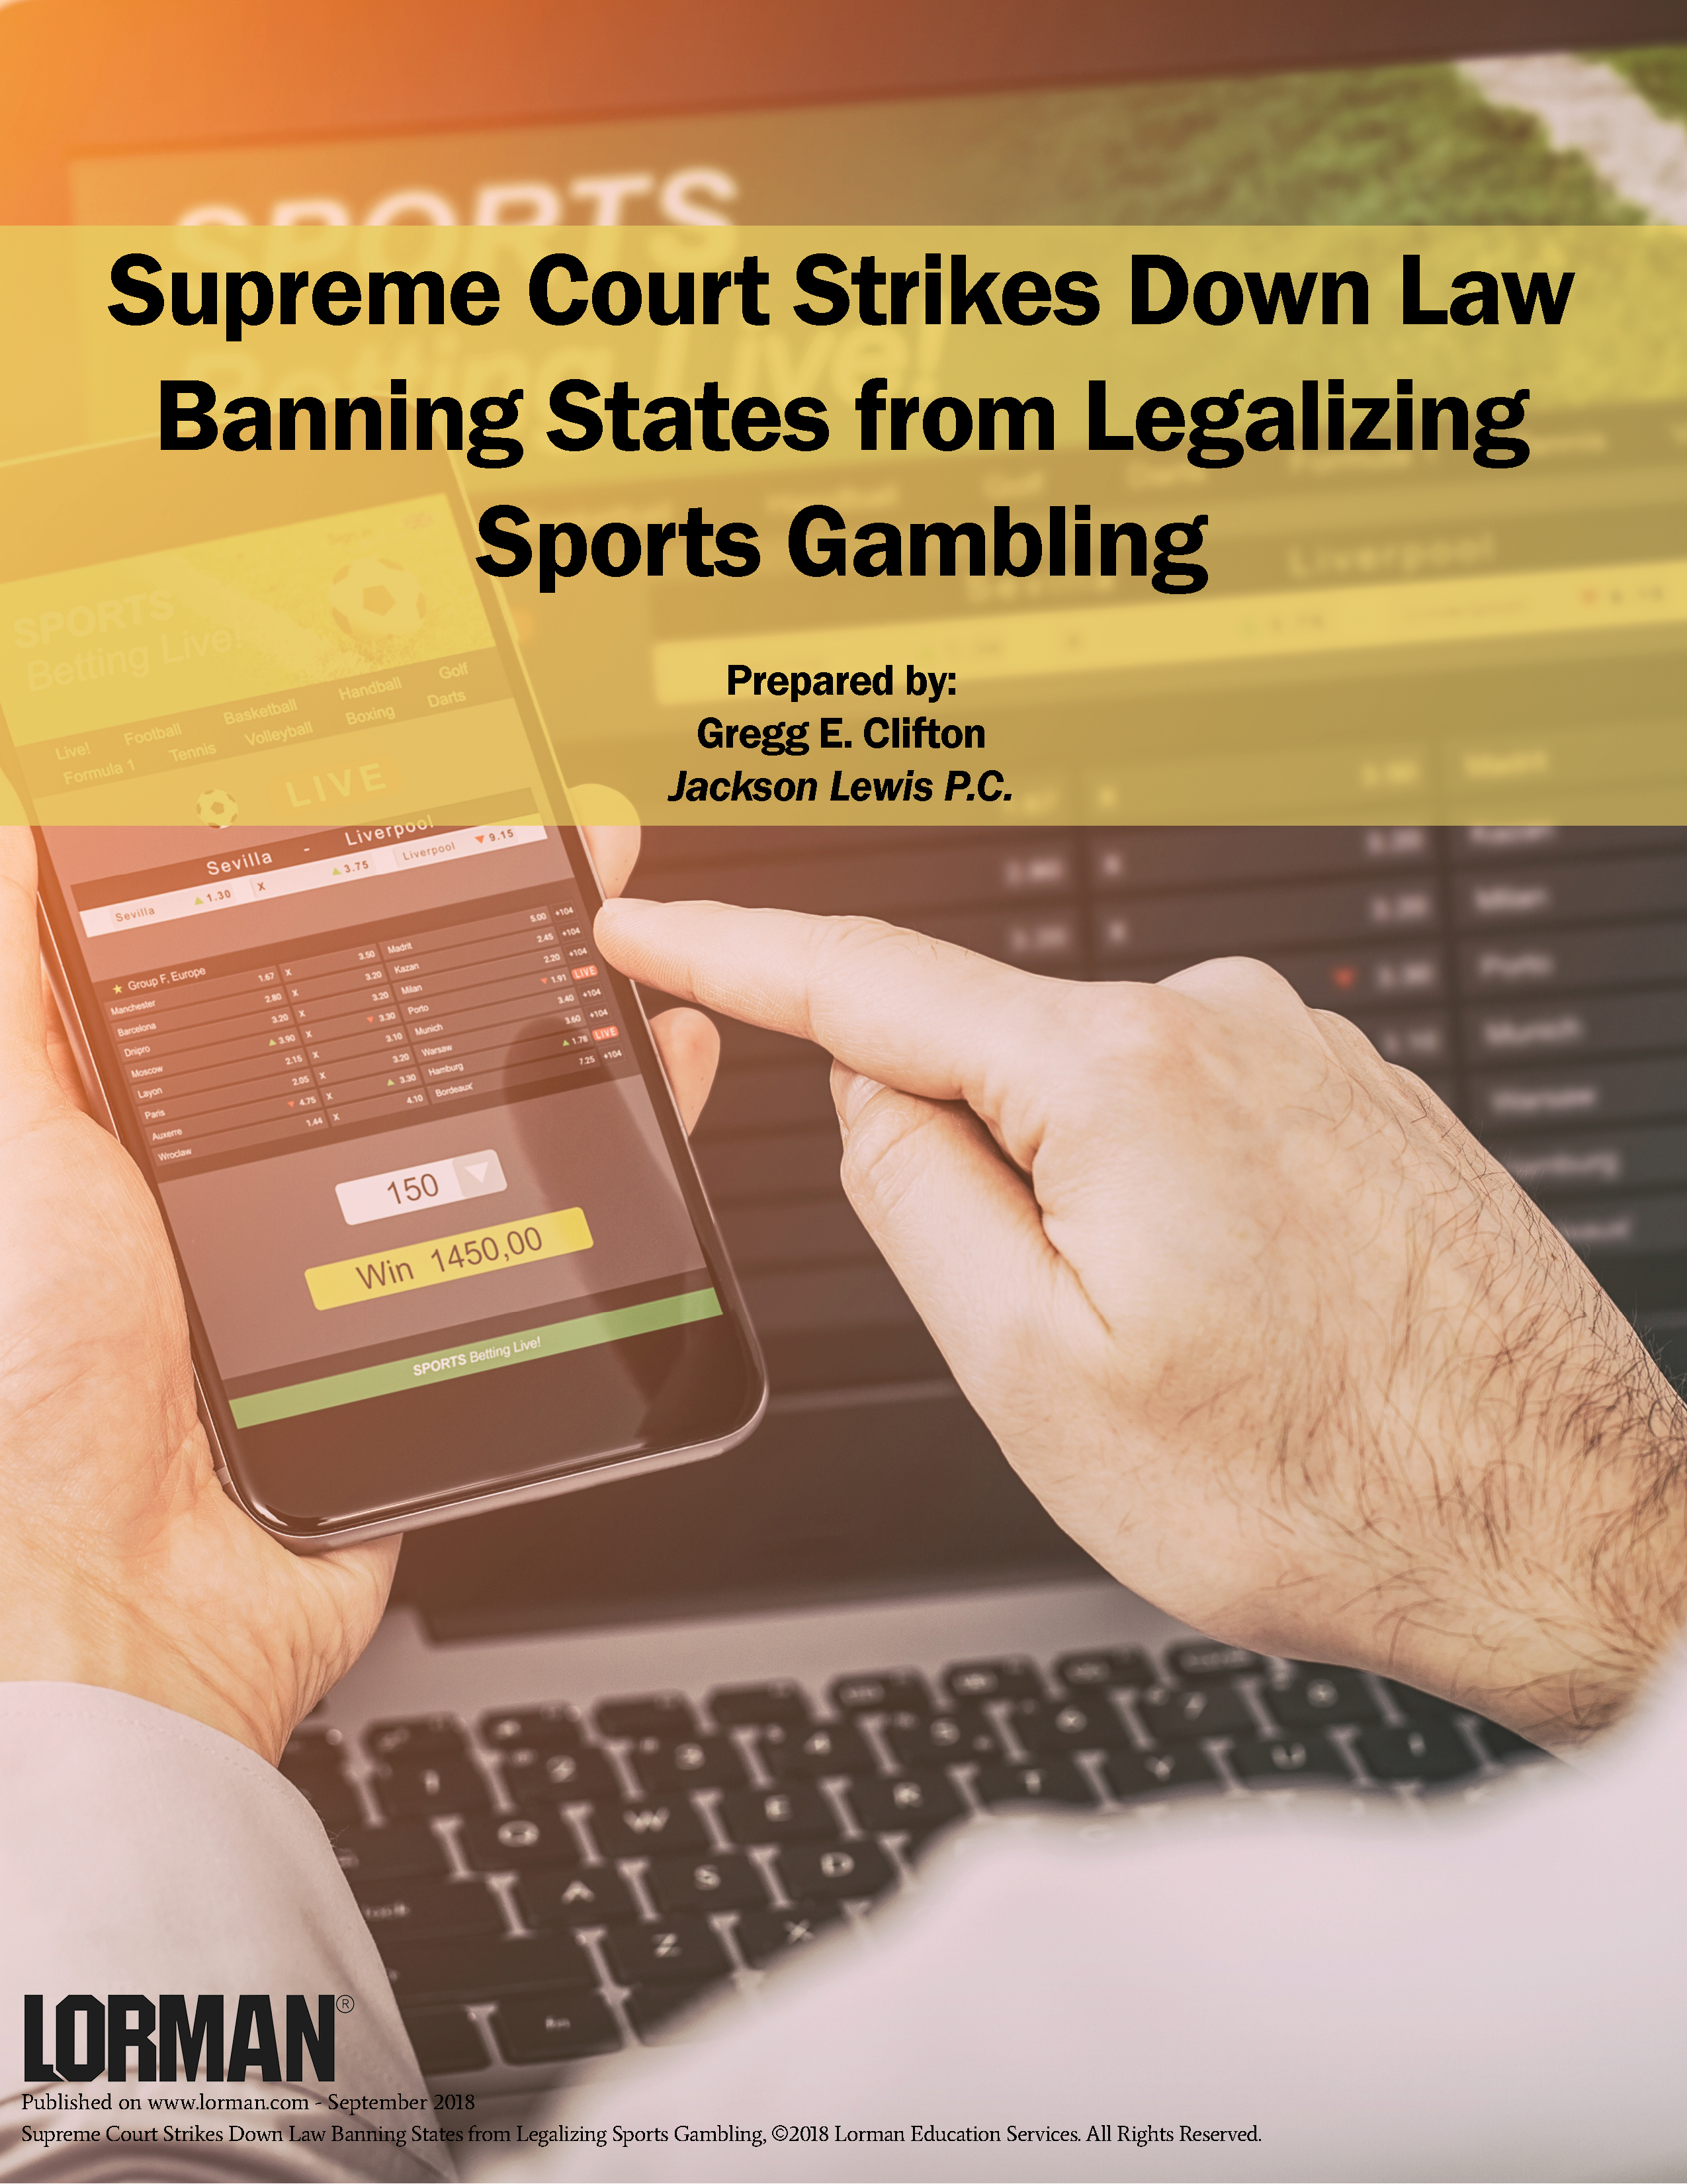 Supreme Court Strikes Down Law Banning States from Legalizing Sports Gambling